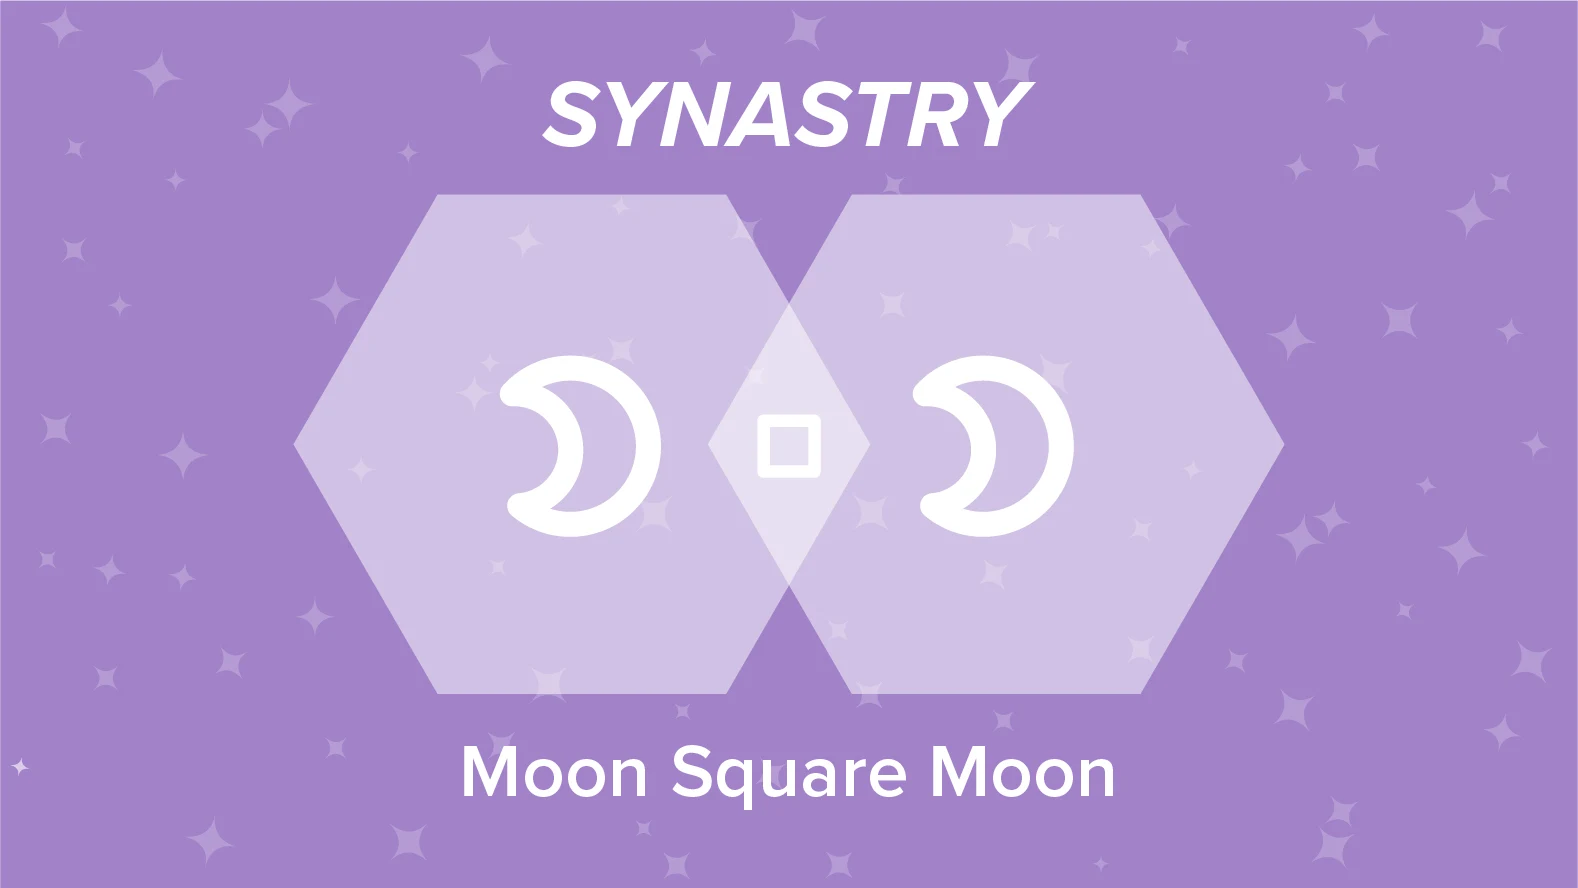 Moon Square Moon Synastry